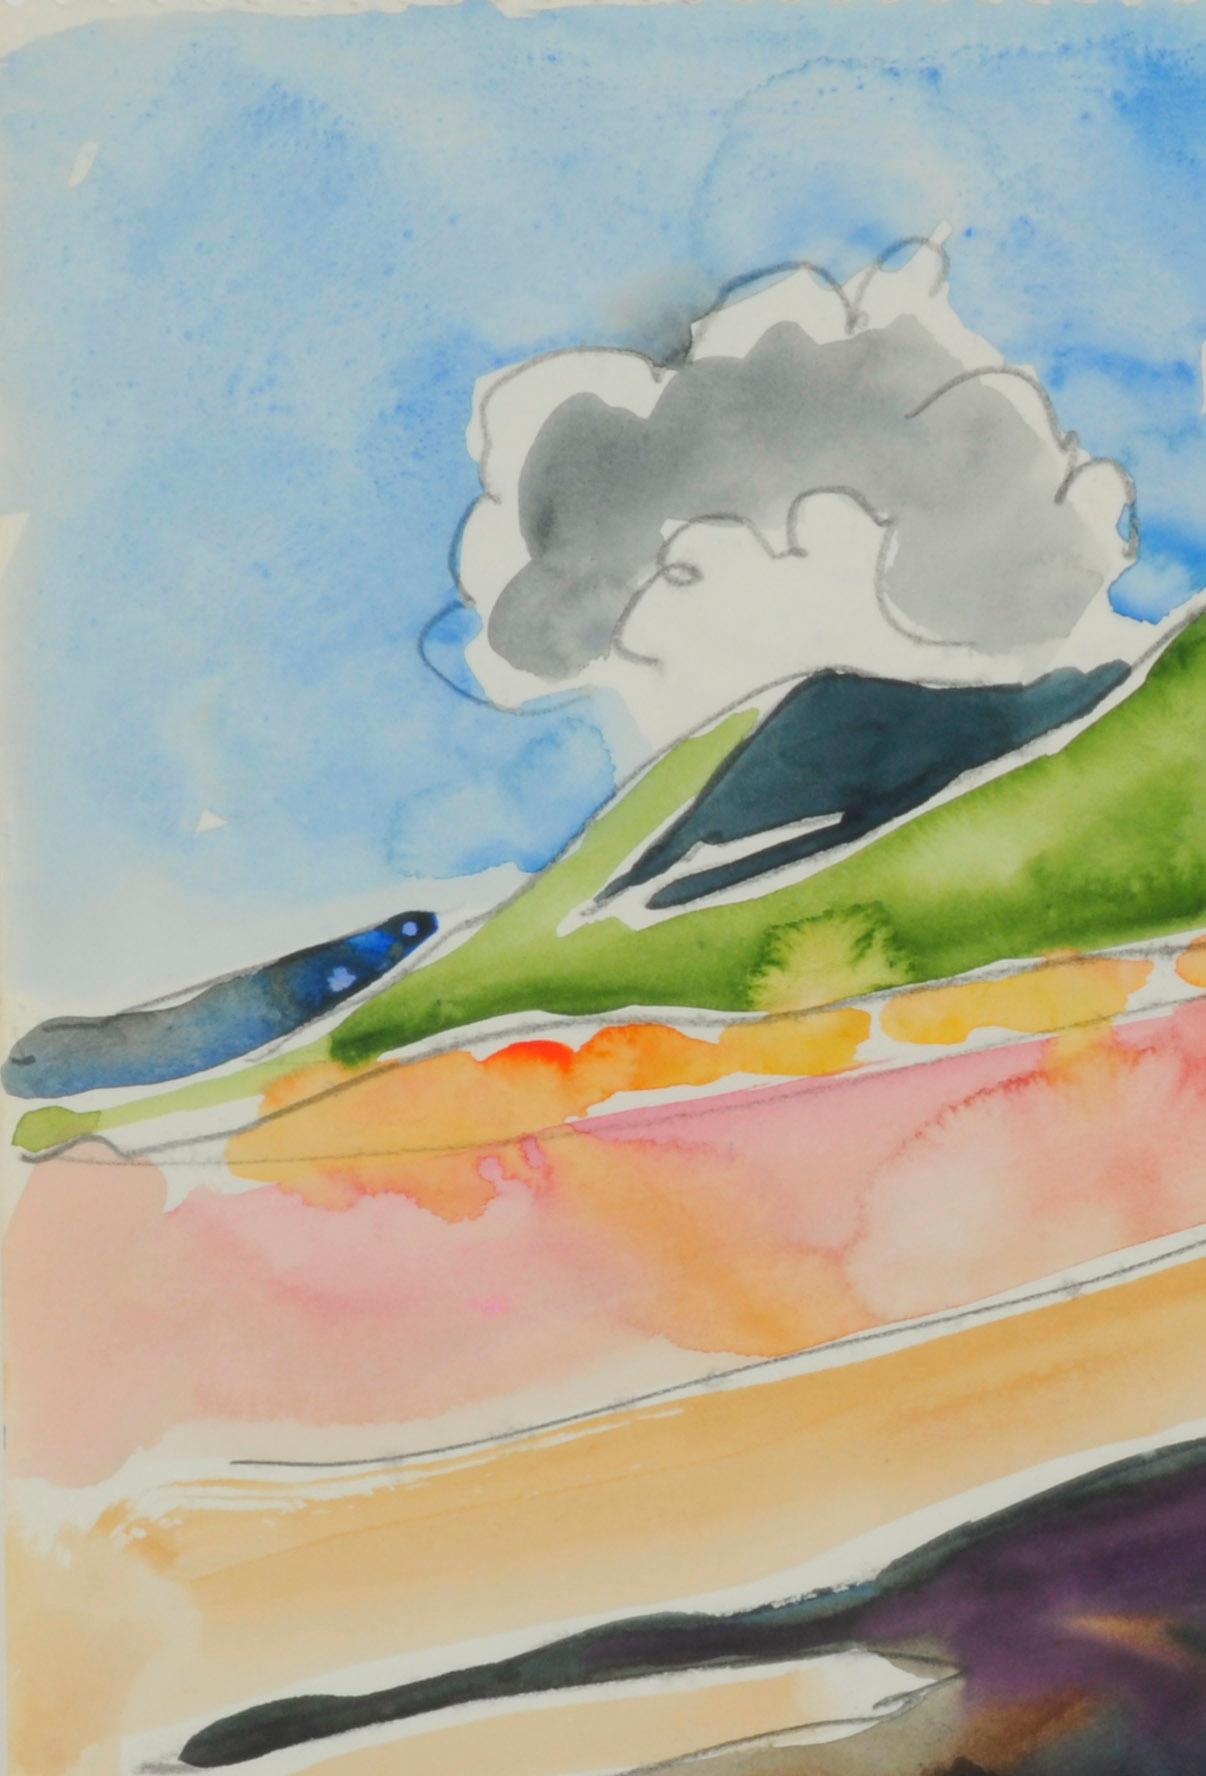 Mountain and Sky, Deer Island, Maine
Watercolor on paper, 1985
Signed in ink lower right corner
From the artist's 1985 sketchbook
Done while at their summer home in Deer Island, Maine.
Condition: Excellent
Image/Sheet size: 13 5/8 x 17